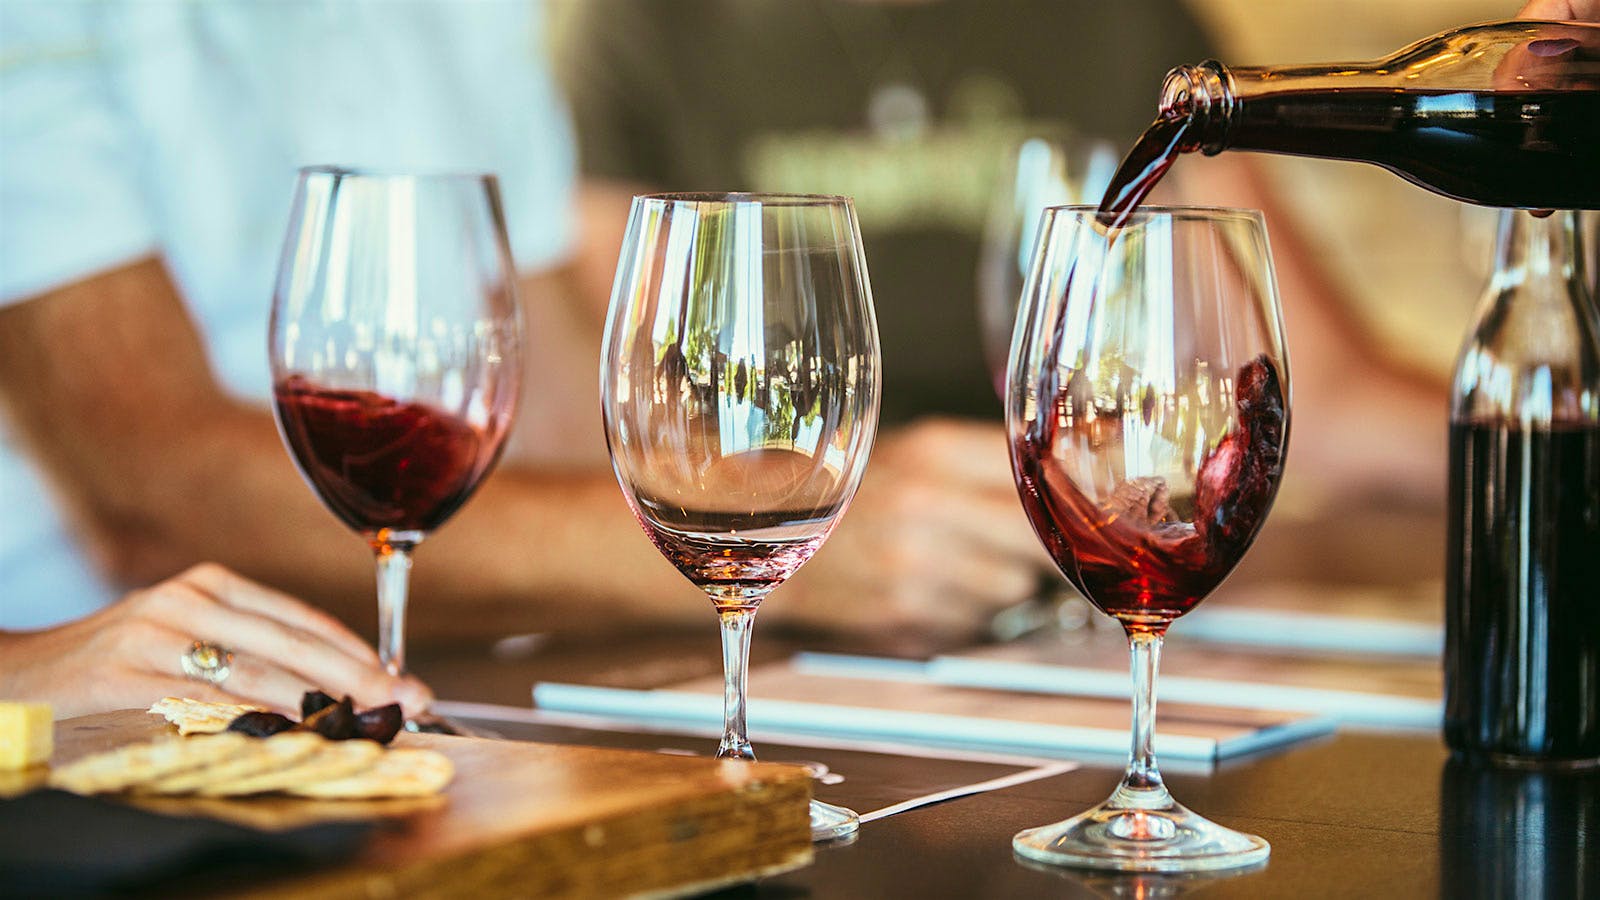 Moderate Alcohol Consumption May Help Those with Cardiovascular Disease